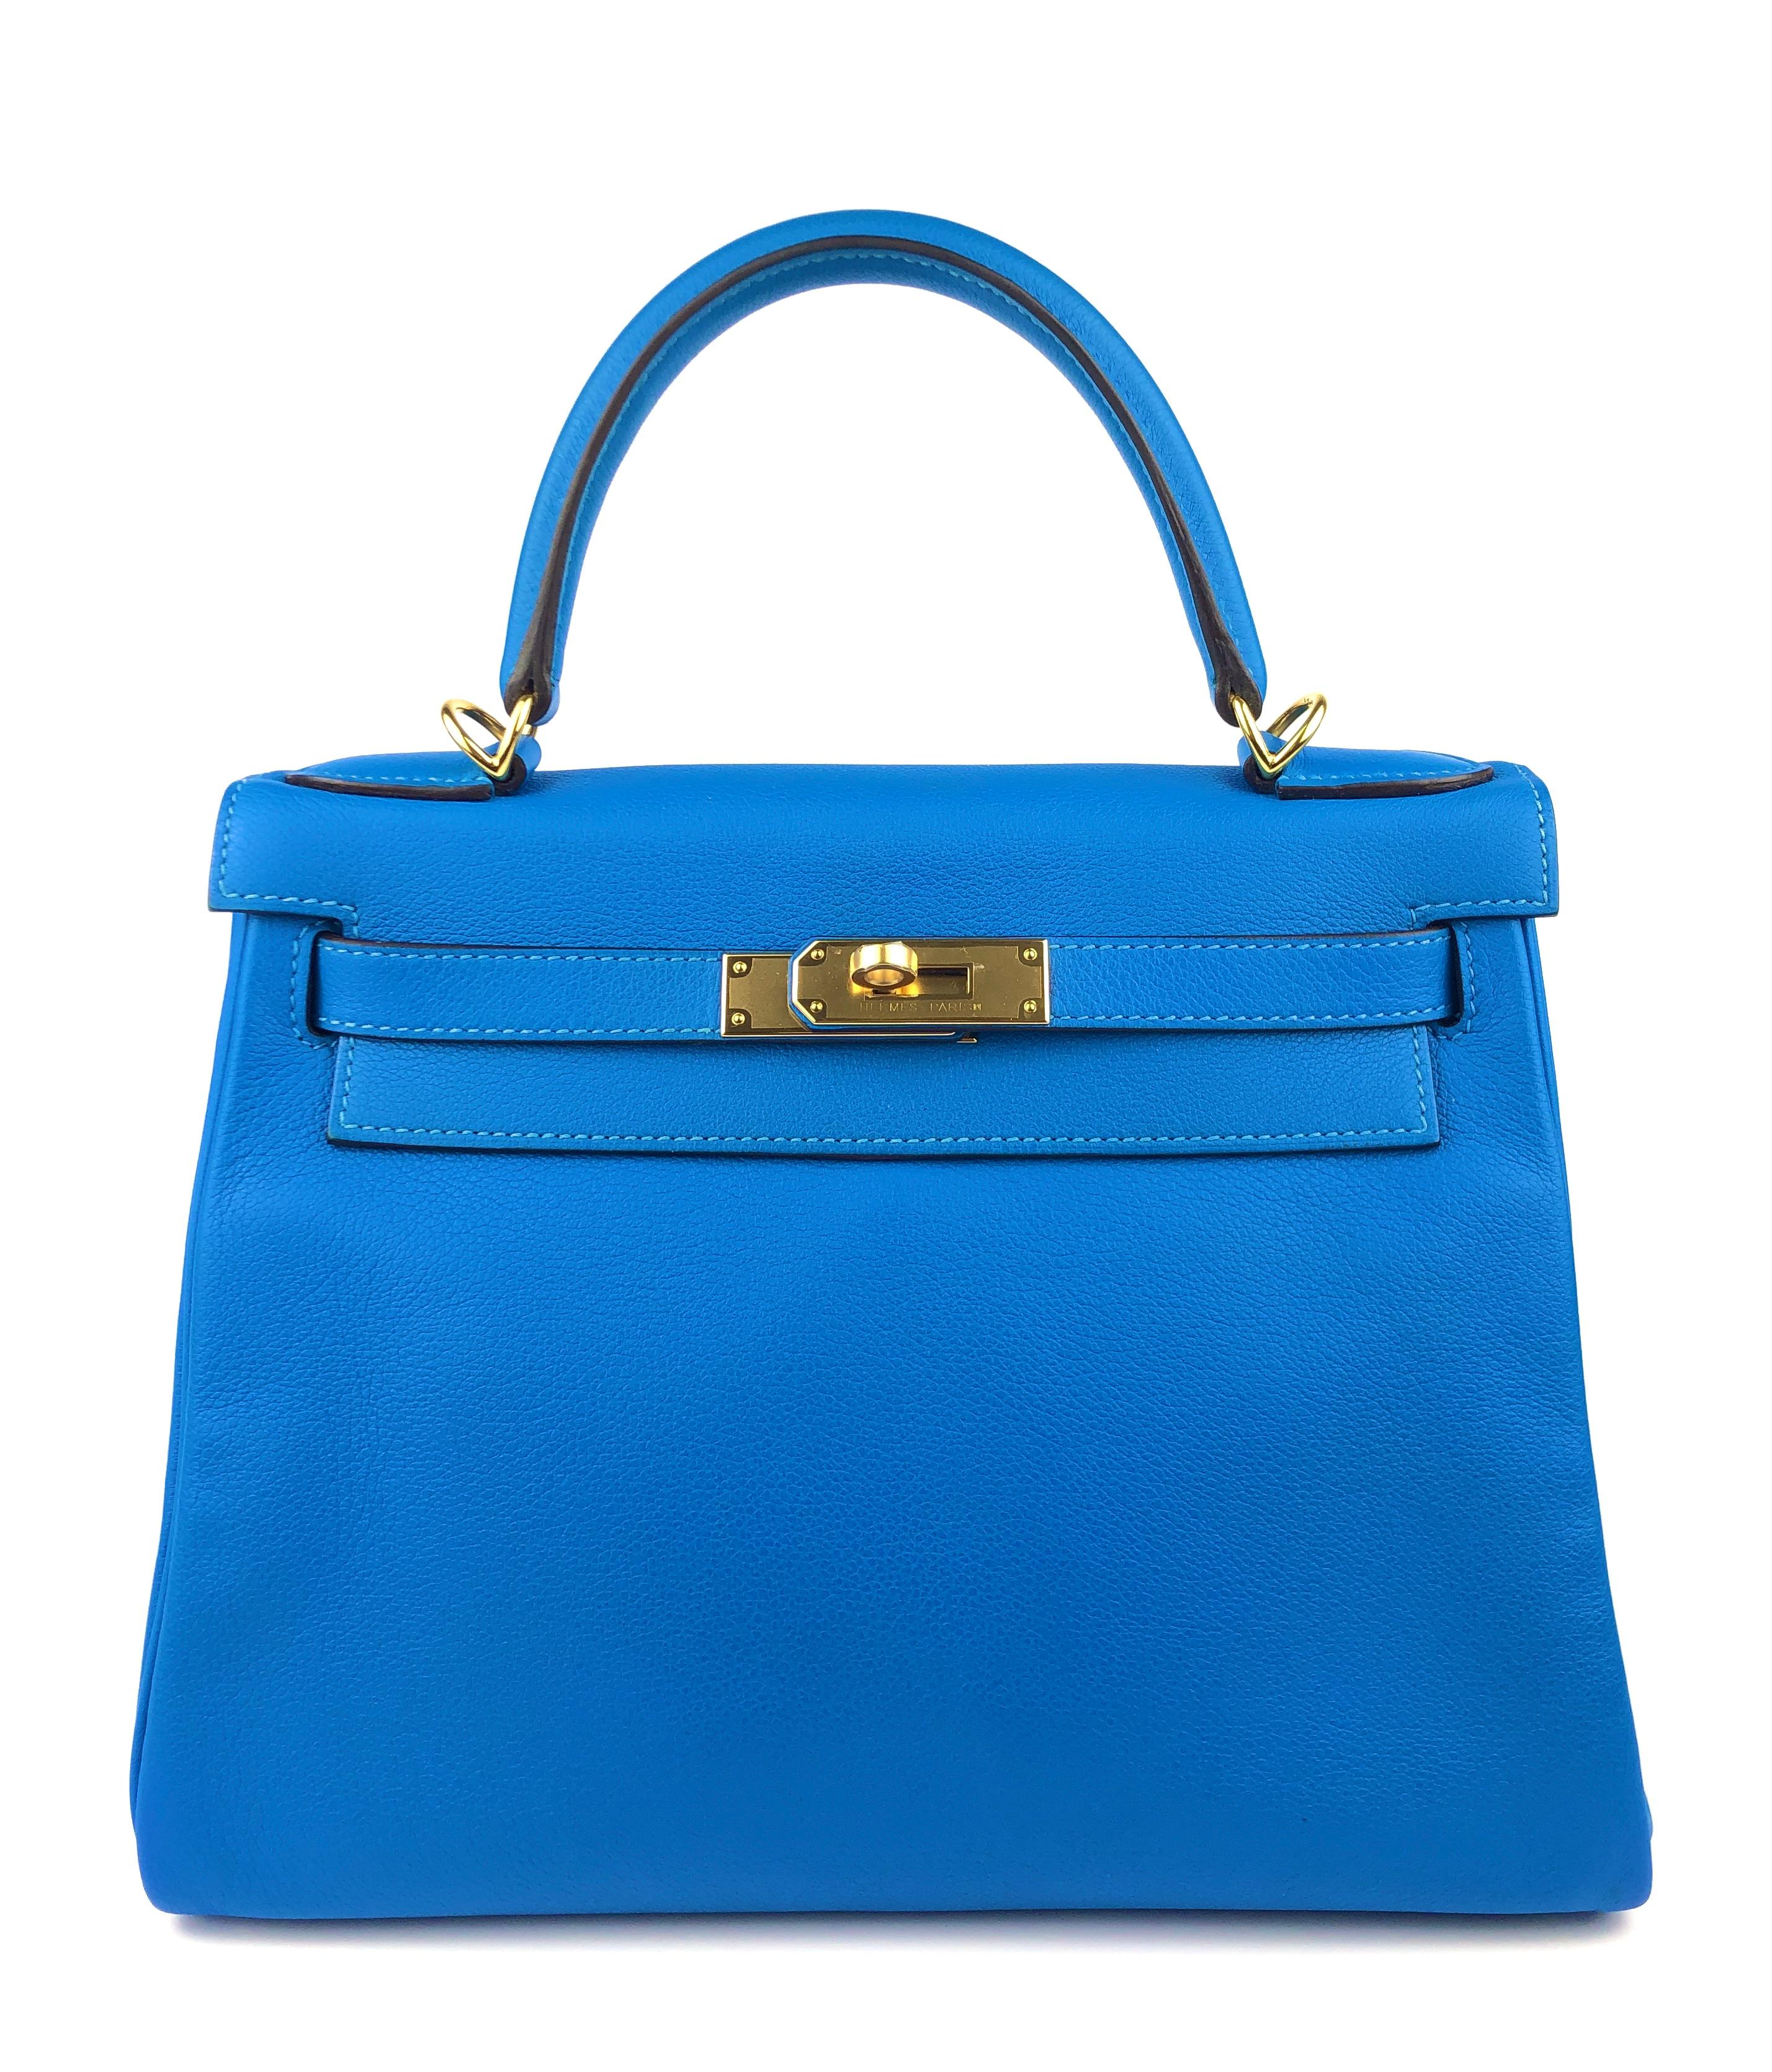 Absolutely Stunning Hermes Kelly 28 Blue Hydra Evercolor Leather Complimented by Gold Hardware. 2016 X Stamp. Excellent Condition Plastic on Hardware and Feet, perfect corners and Structure. 

Shop with Confidence from Lux Addicts. Authenticity